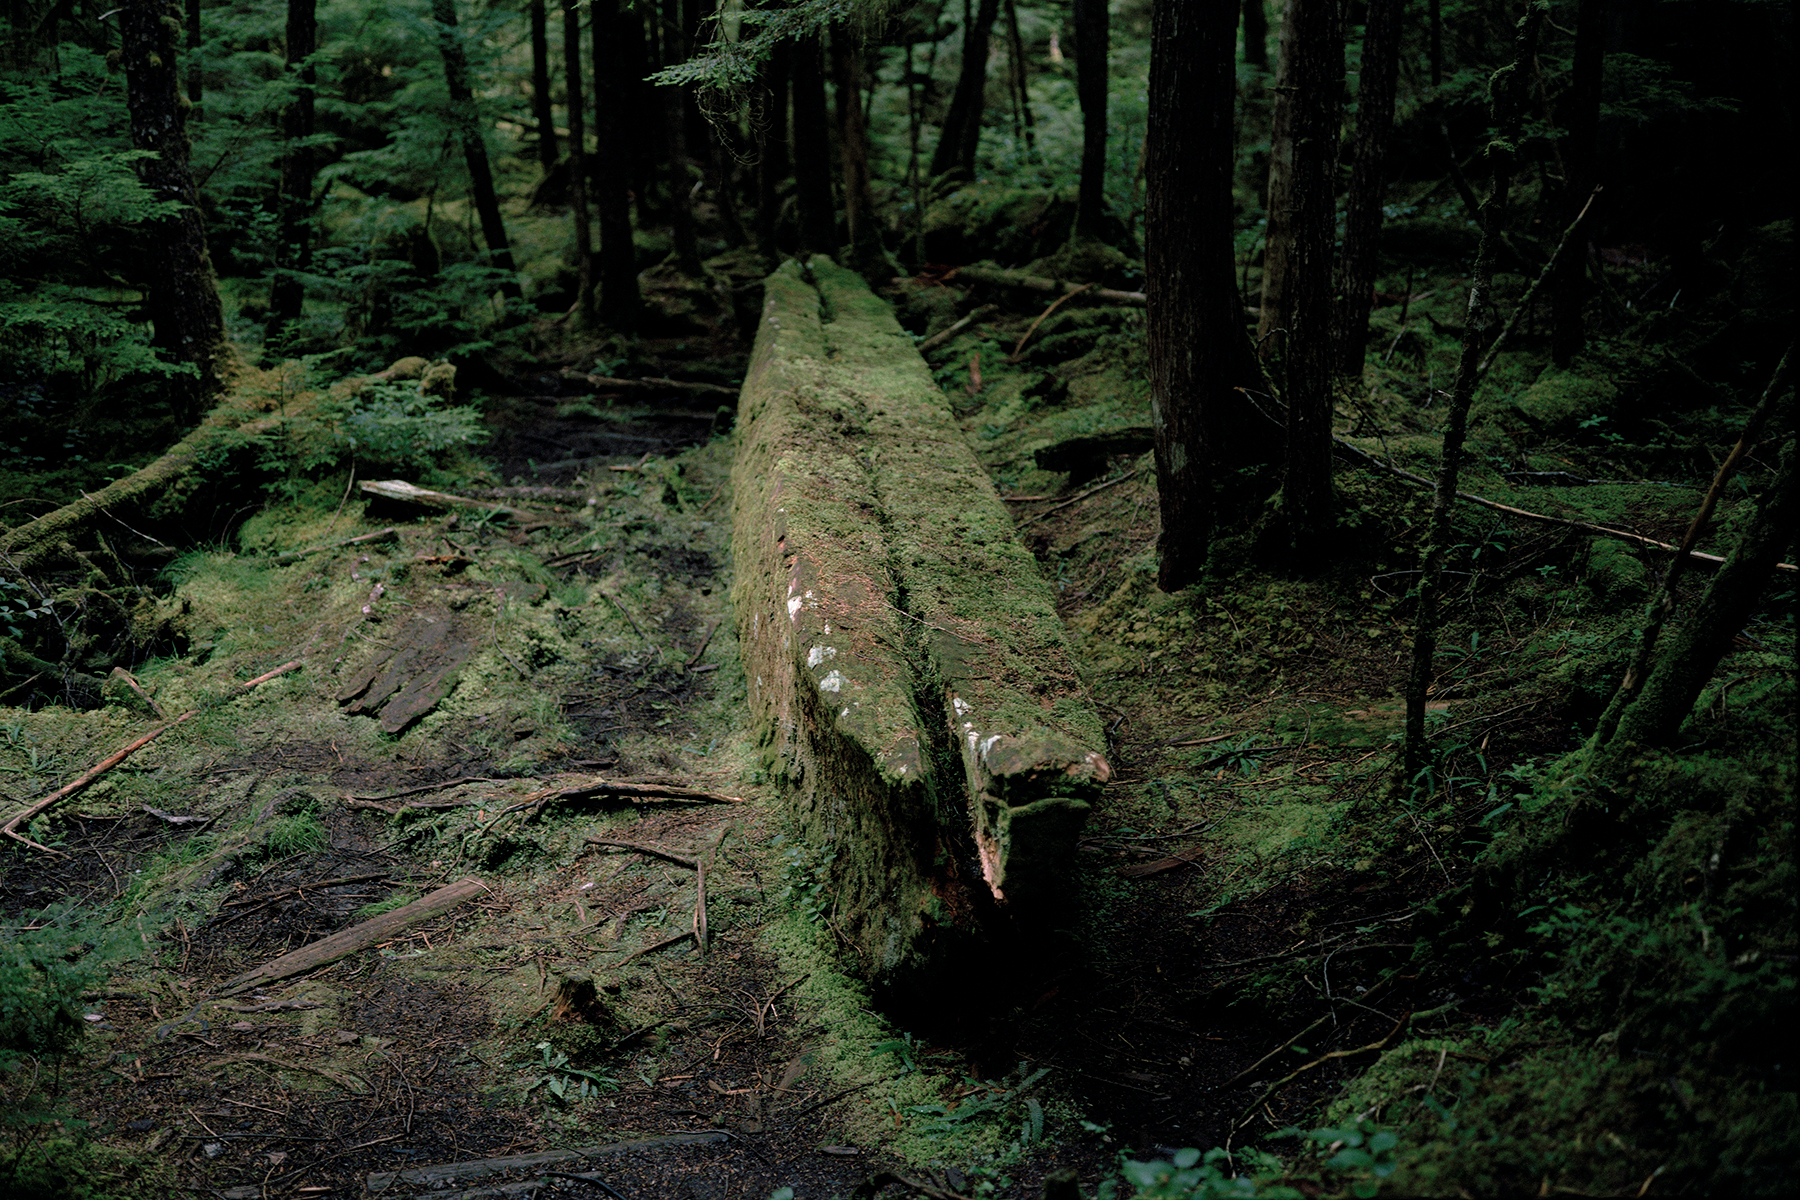     Johan Hallberg-Campbell, Haida Gwaii, British Columbia (War canoe sits unfinished in the forest where it fell. Dated 1860s), 2014. Courtesy of the artist. 

